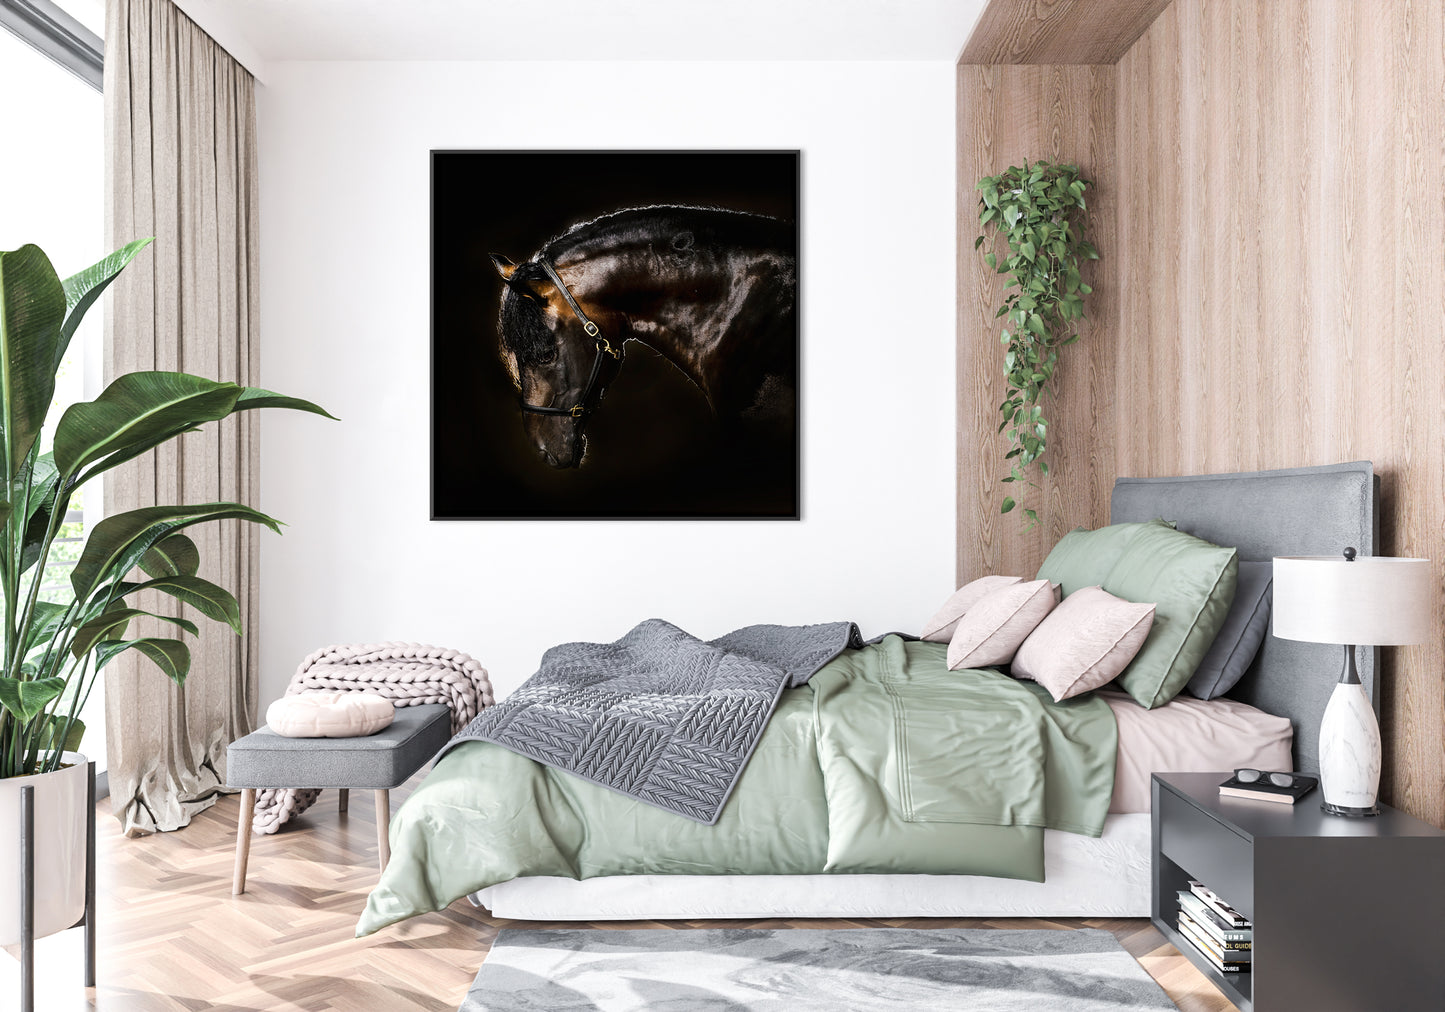 Elegant bedroom with large photograph of horse on the wall